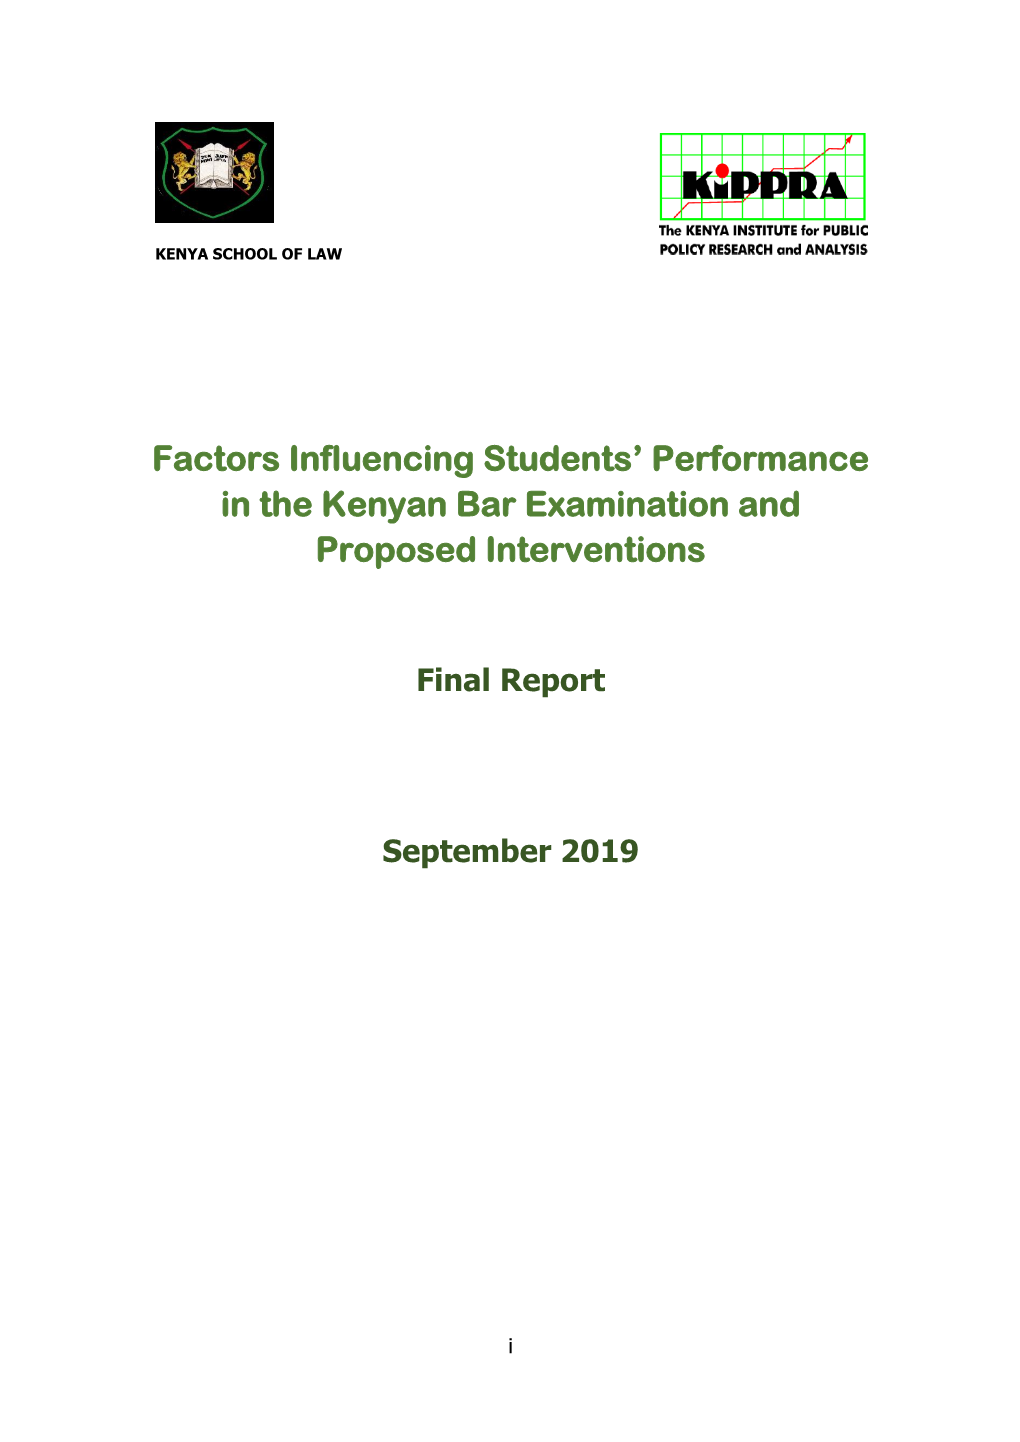 Factors Influencing Students' Performance in the Kenyan Bar Examination and Proposed Interventions